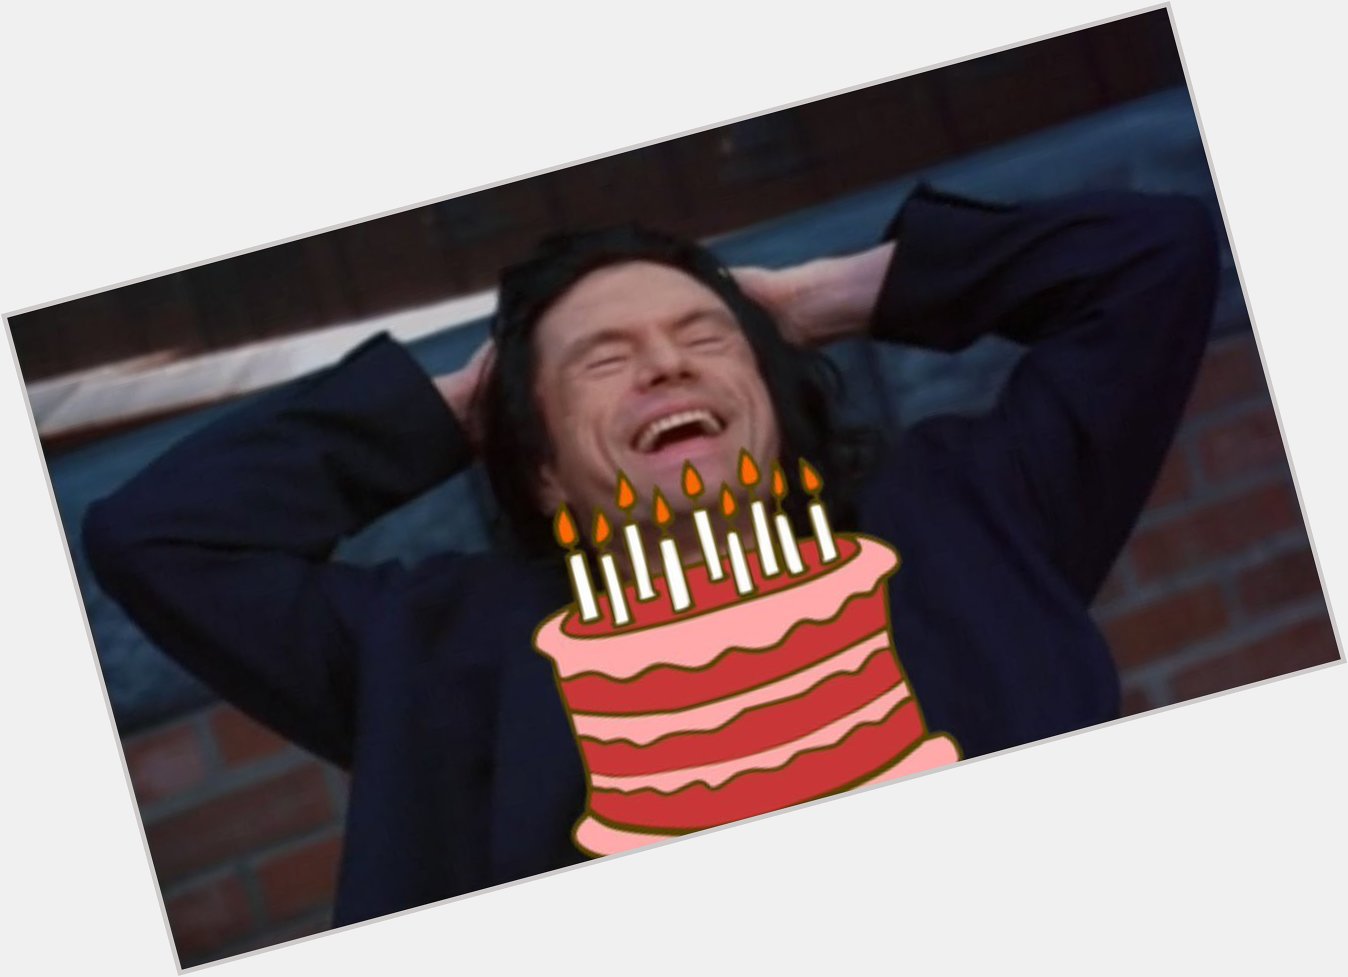 Happy 63rd Birthday to Tommy Wiseau! The actor, director, producer, and screenwriter of The Room. 